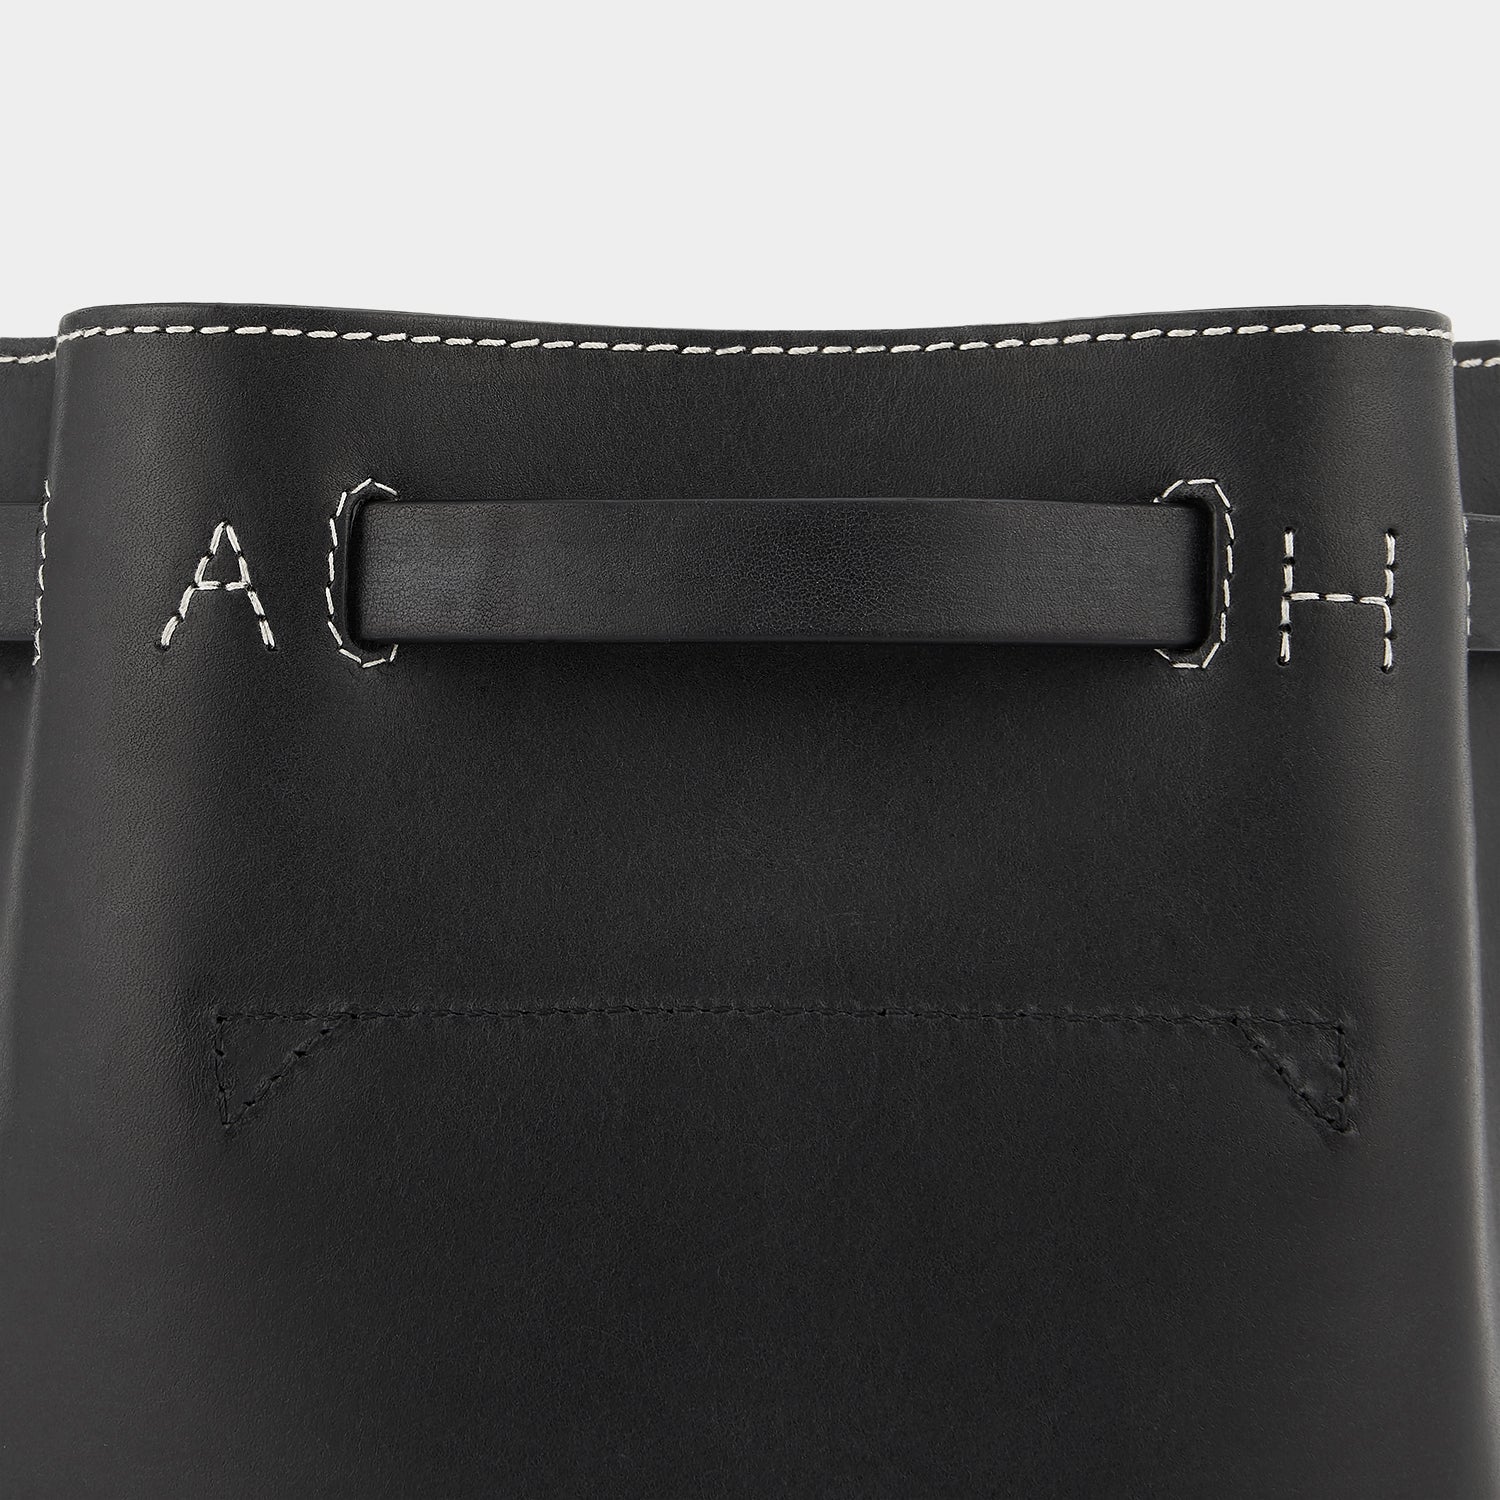 「Return to Nature」バケットバッグ スモール -

                  
                    Compostable Leather in Black -
                  

                  Anya Hindmarch JP
